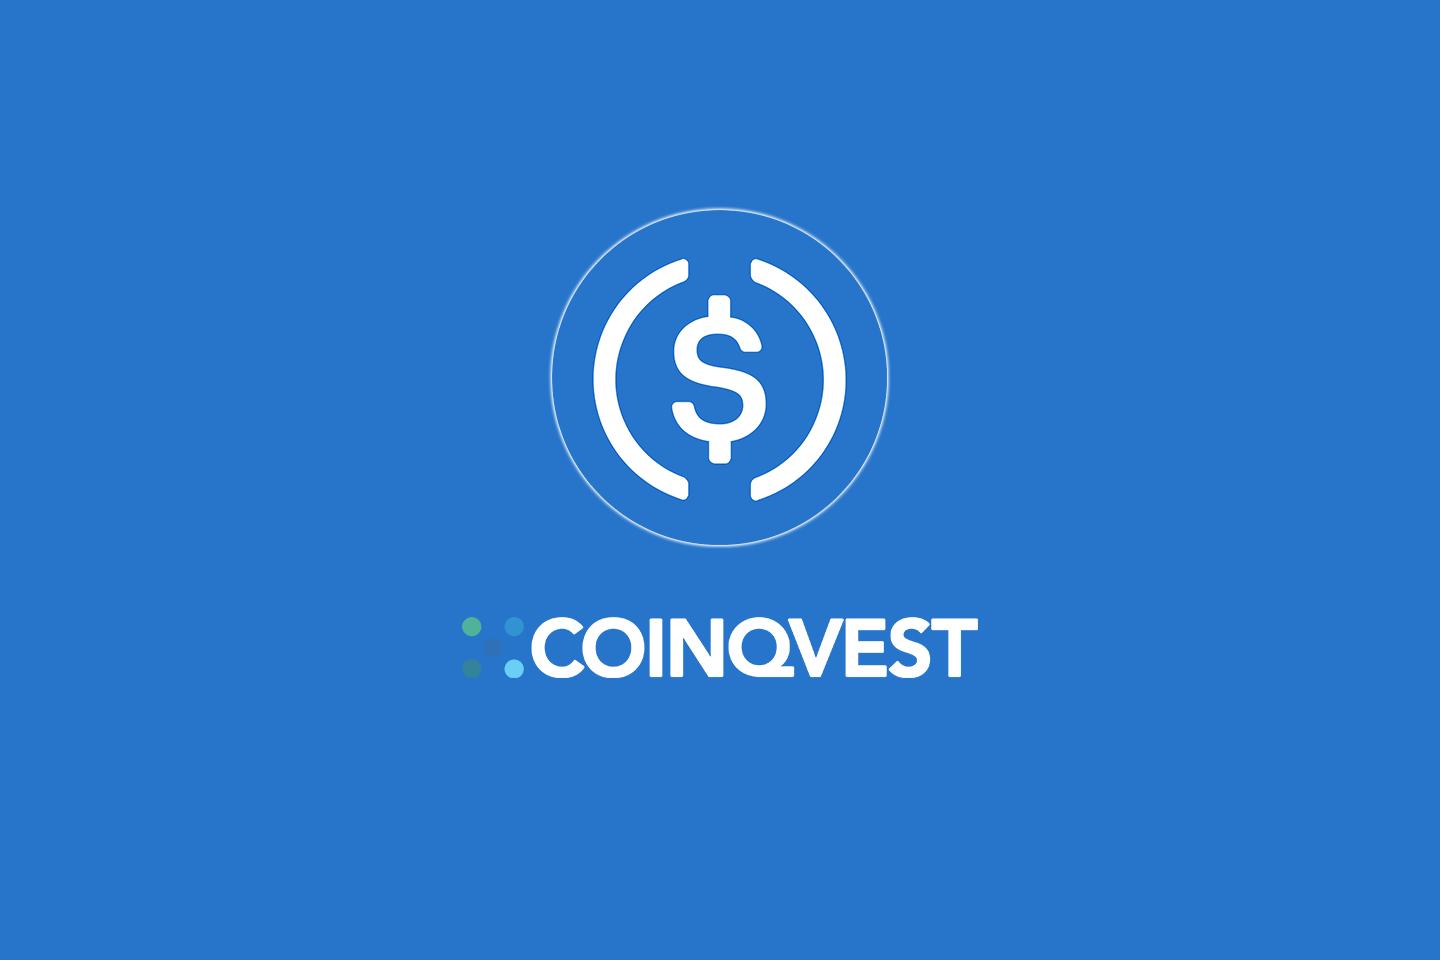 USDC is now Available as Settlement and Payment Option for Online Businesses on COINQVEST